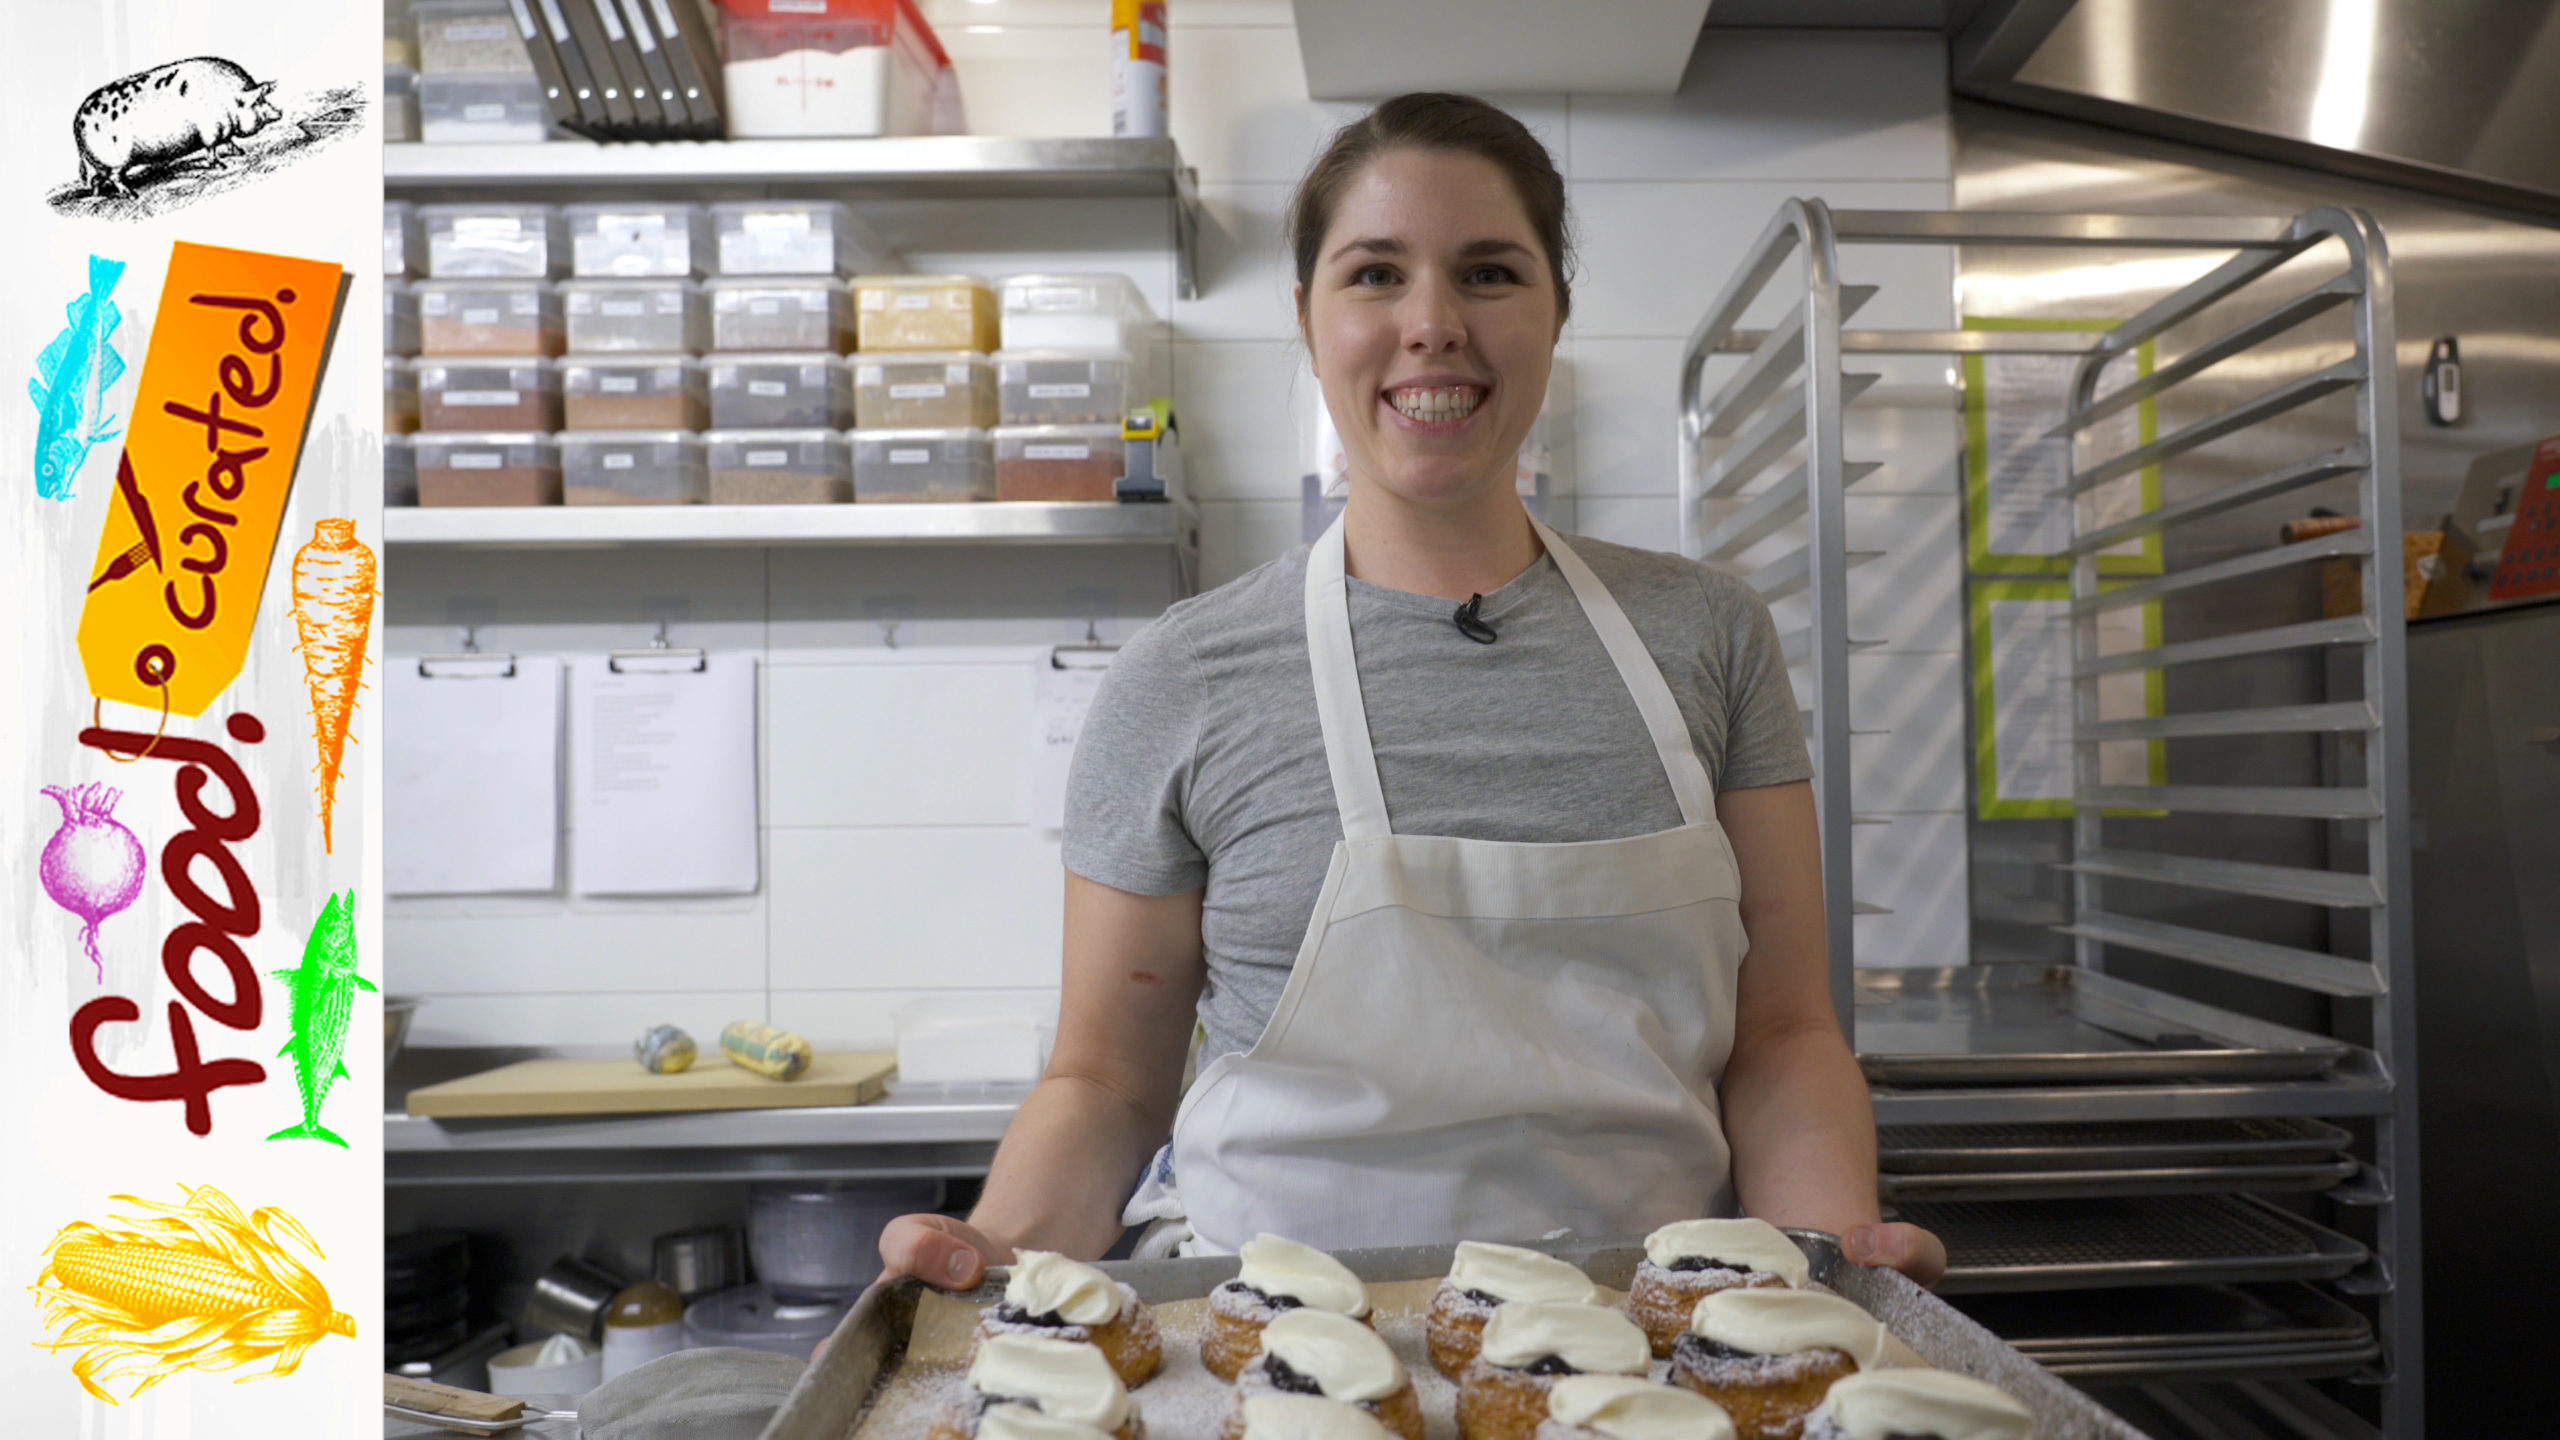 The Morning Bake: Chef Kelly Mencin's Pastry & Sourdough Bread Program  Shines at Rolo's - Food. Curated.